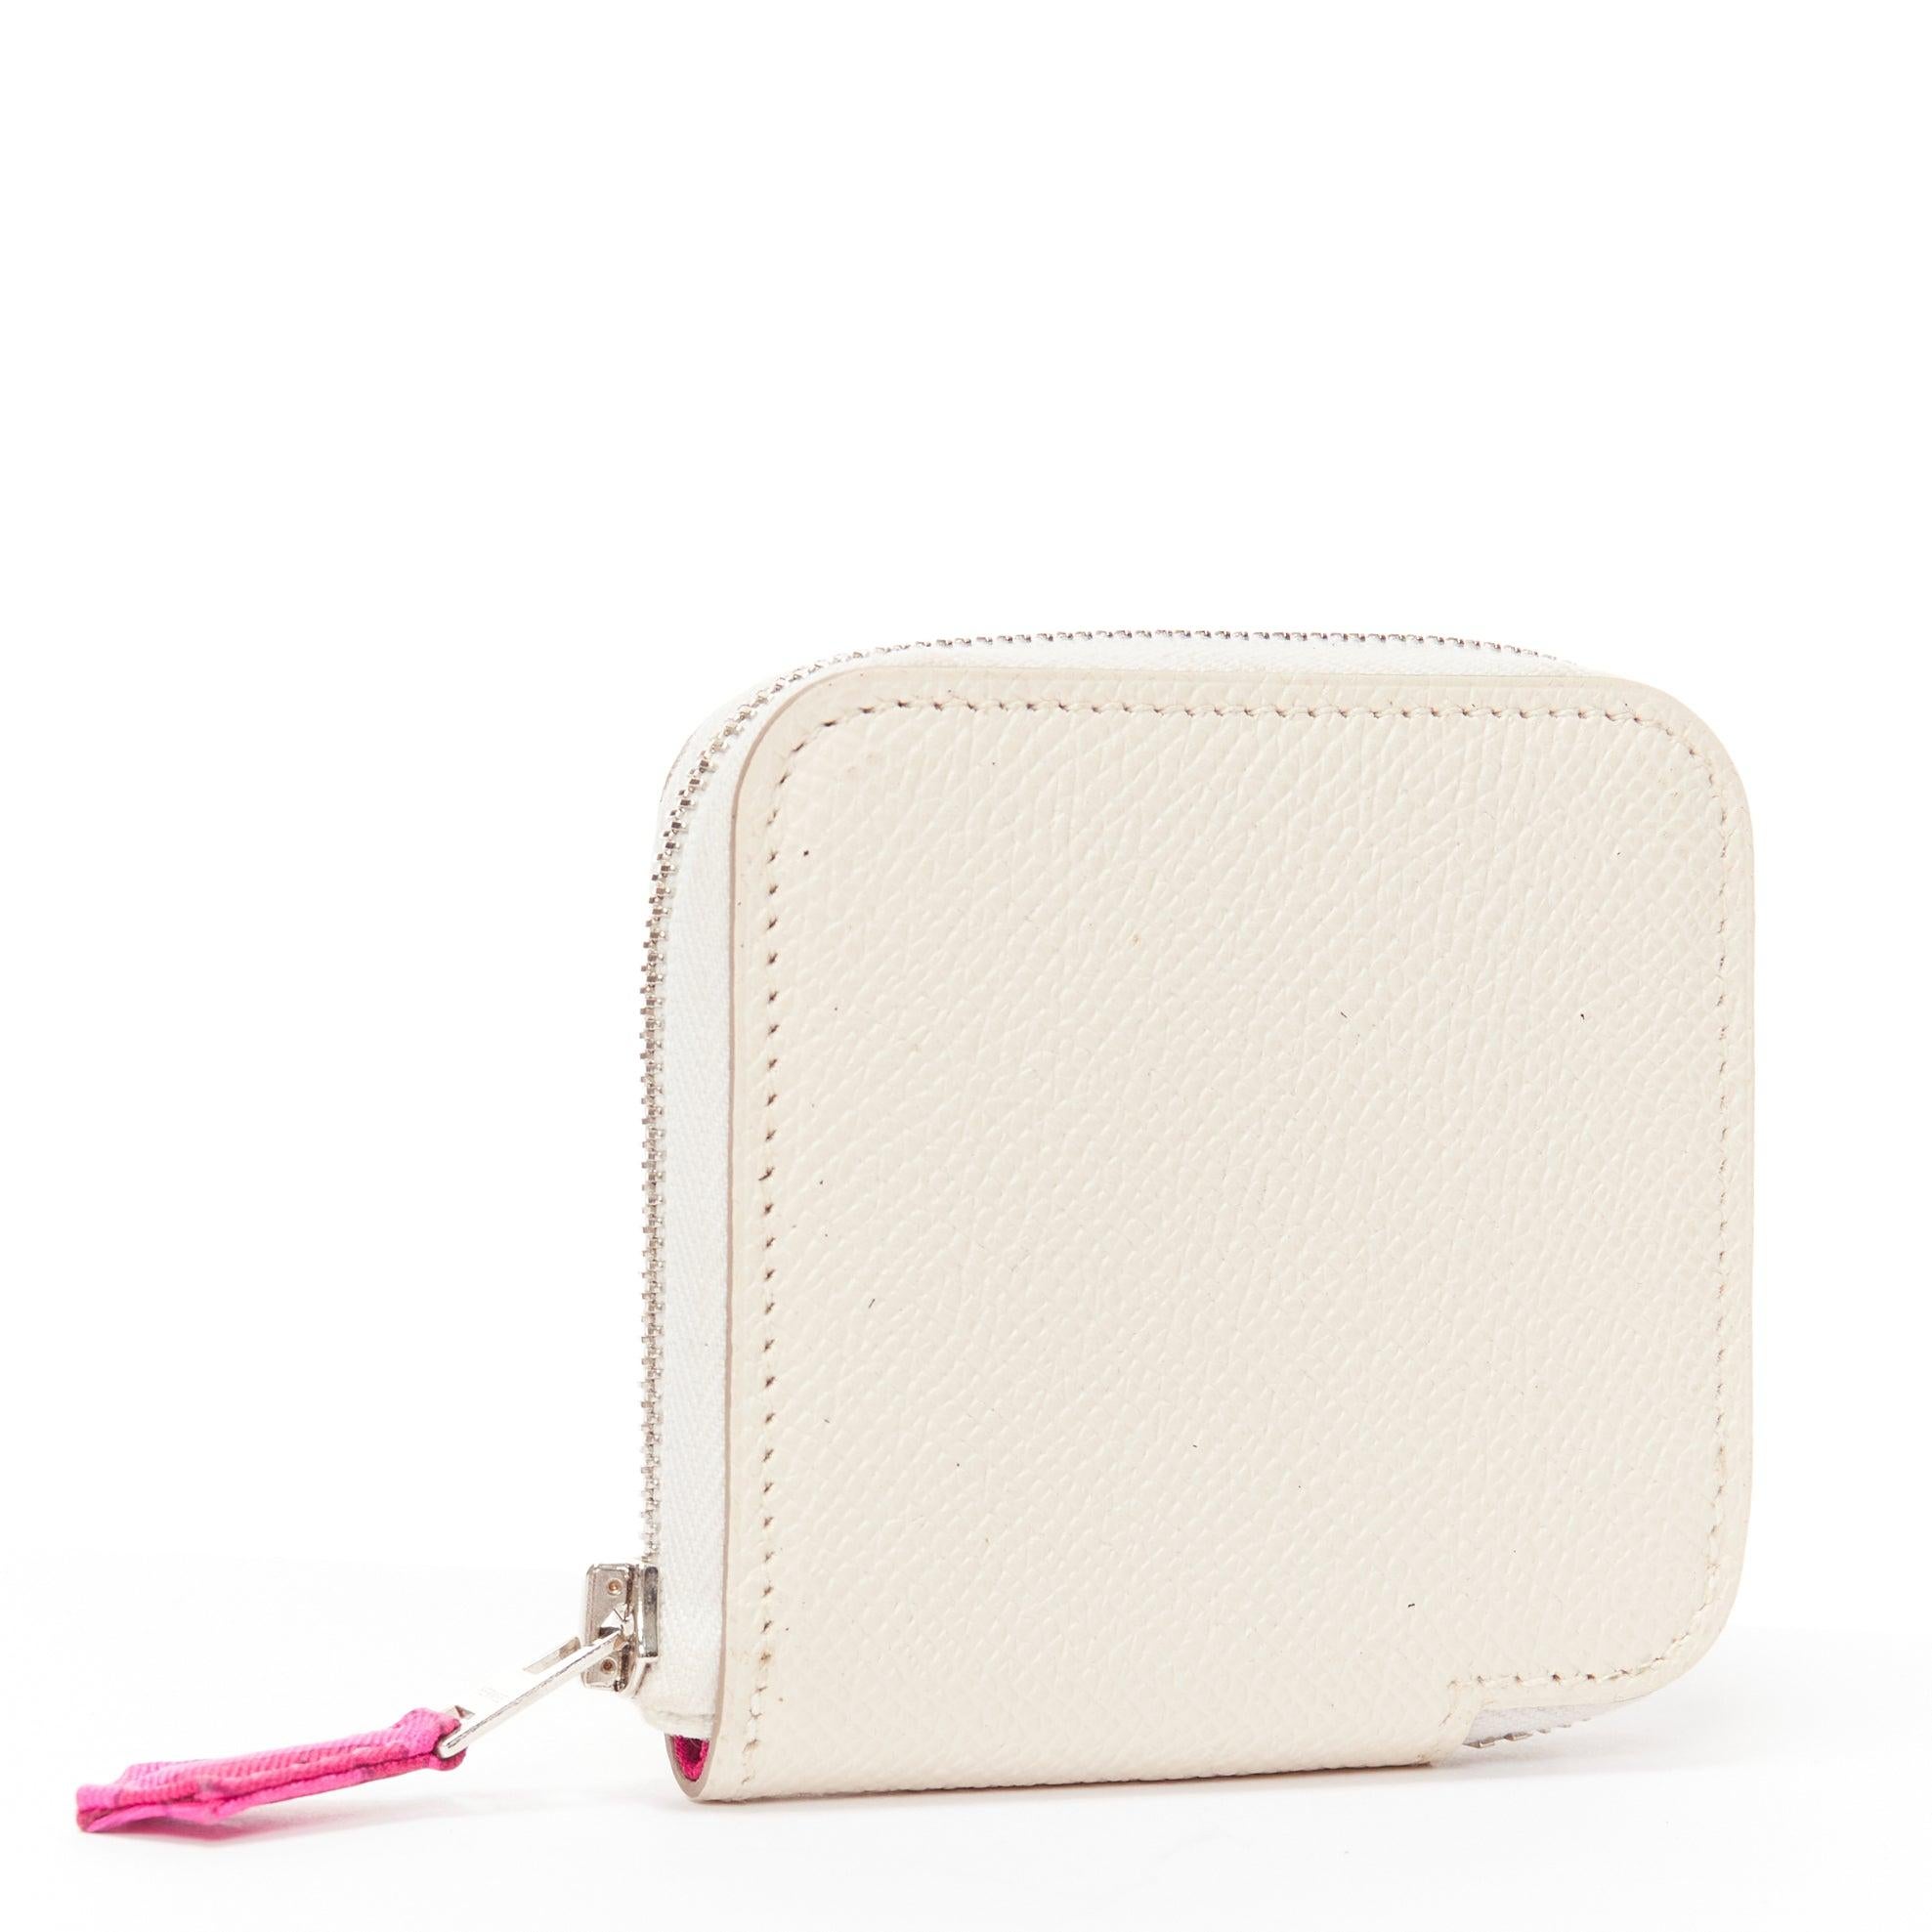 HERMES Azap Compact white leather pink printed silk zip around coins holder
Reference: AAWC/A00993
Brand: Hermes
Model: Azap Compact
Material: Leather
Color: White, Pink
Pattern: Chain
Closure: Zip
Lining: Pink Silk
Extra Details: Chain printed hot